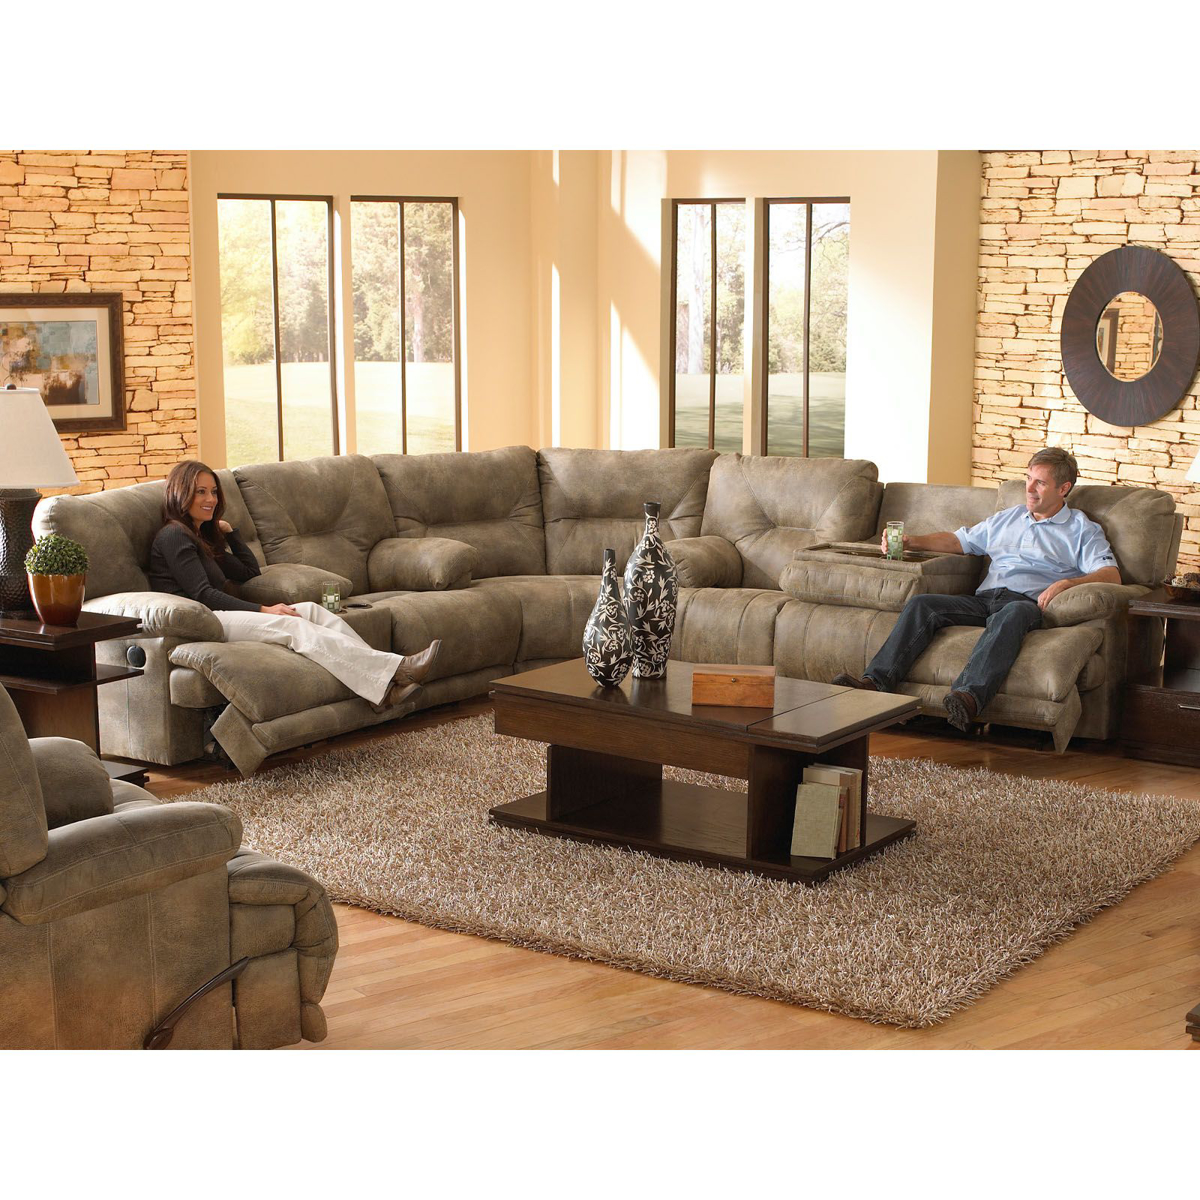 Picture of Voyager Lay Flat Recliner Sectional